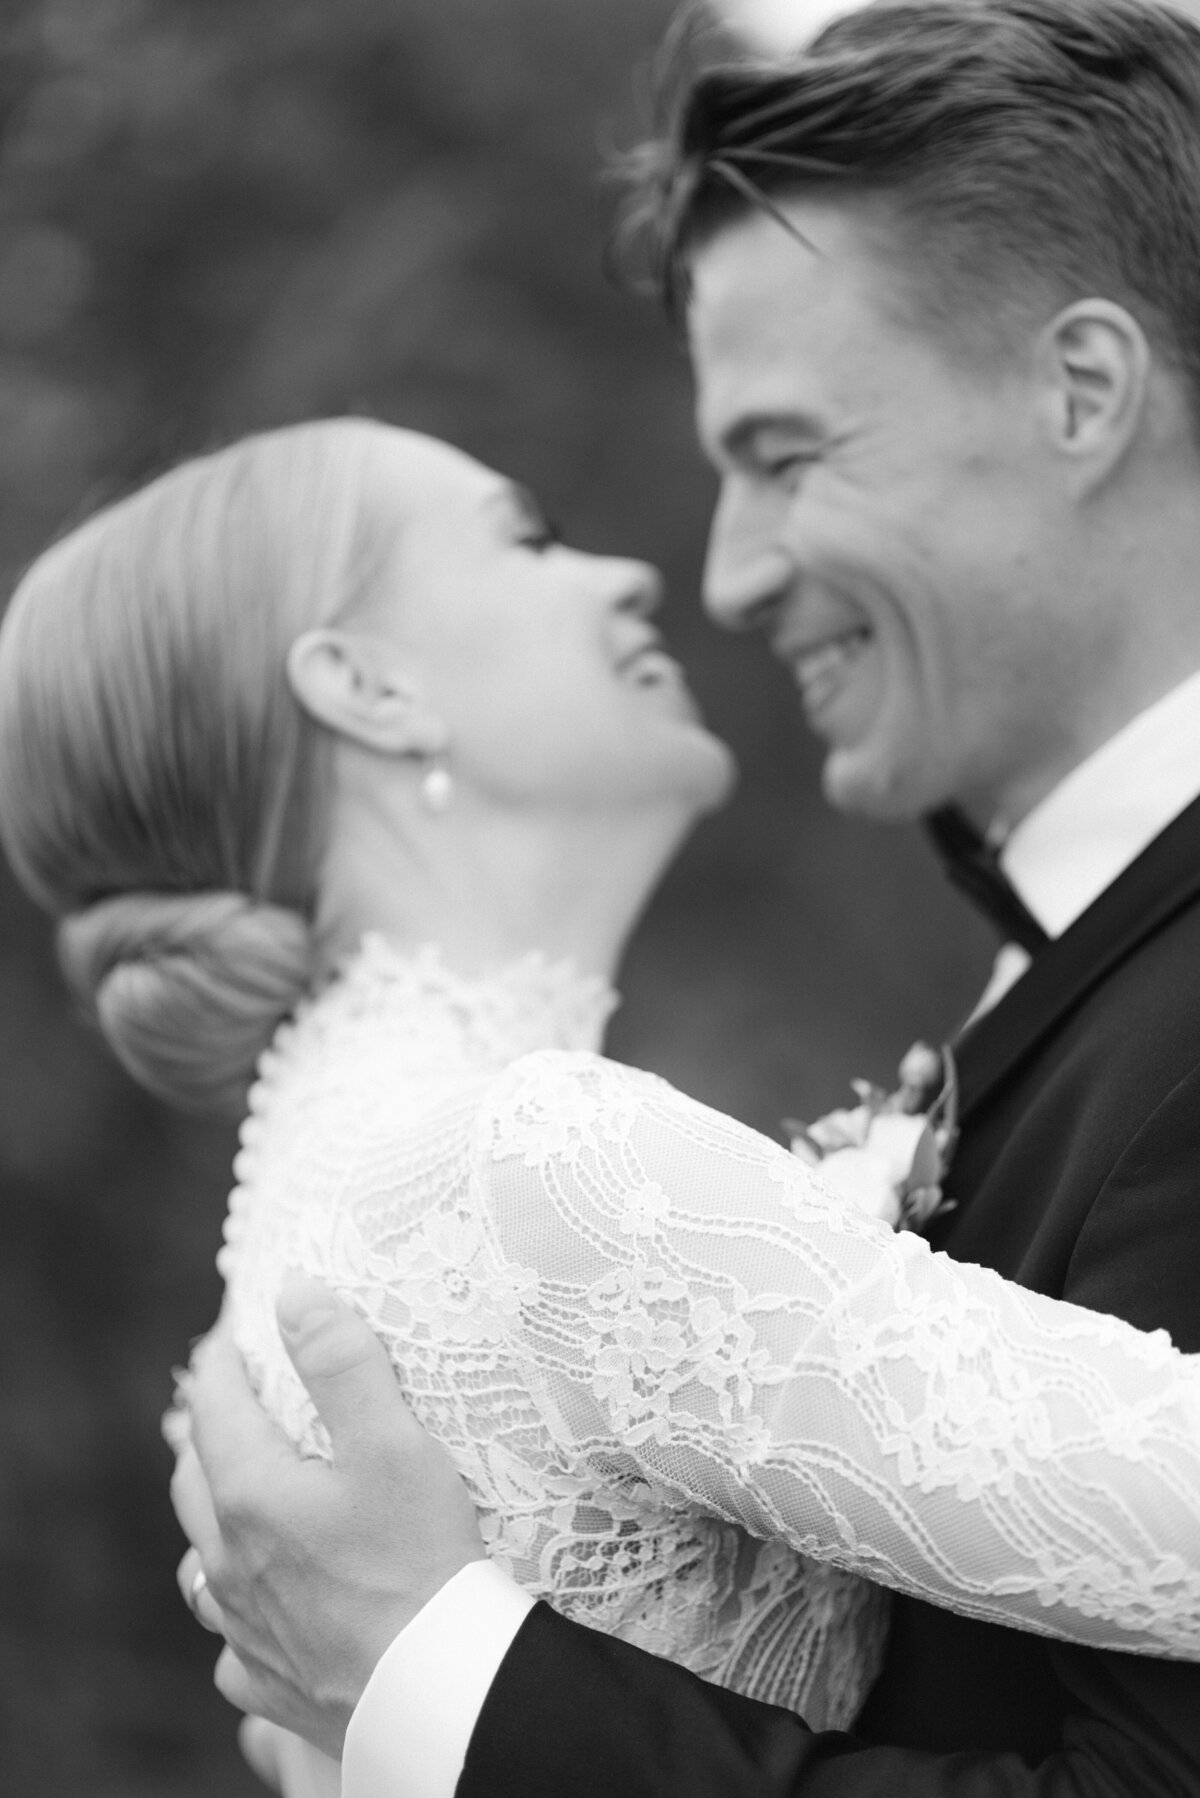 Wedding couple laughing and looking at each other in a wedding photograph by Finnish photographer Hannika Gabrielsson.